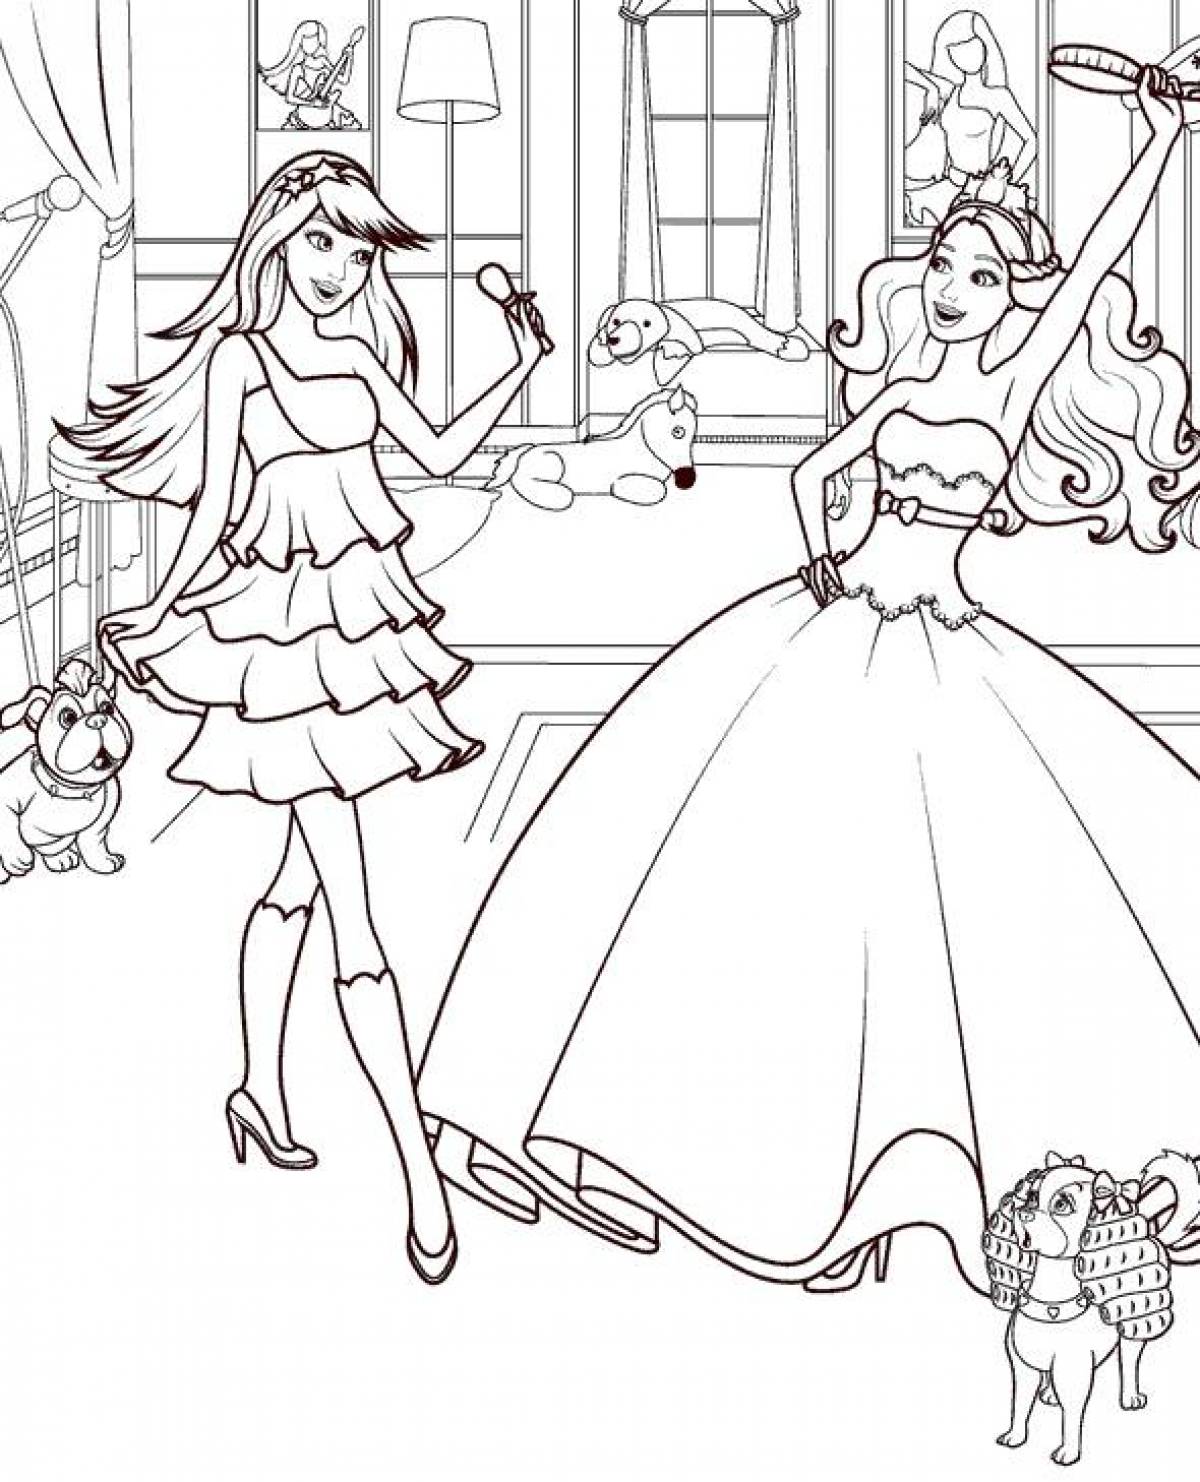 Coloring pages for girls barbie play